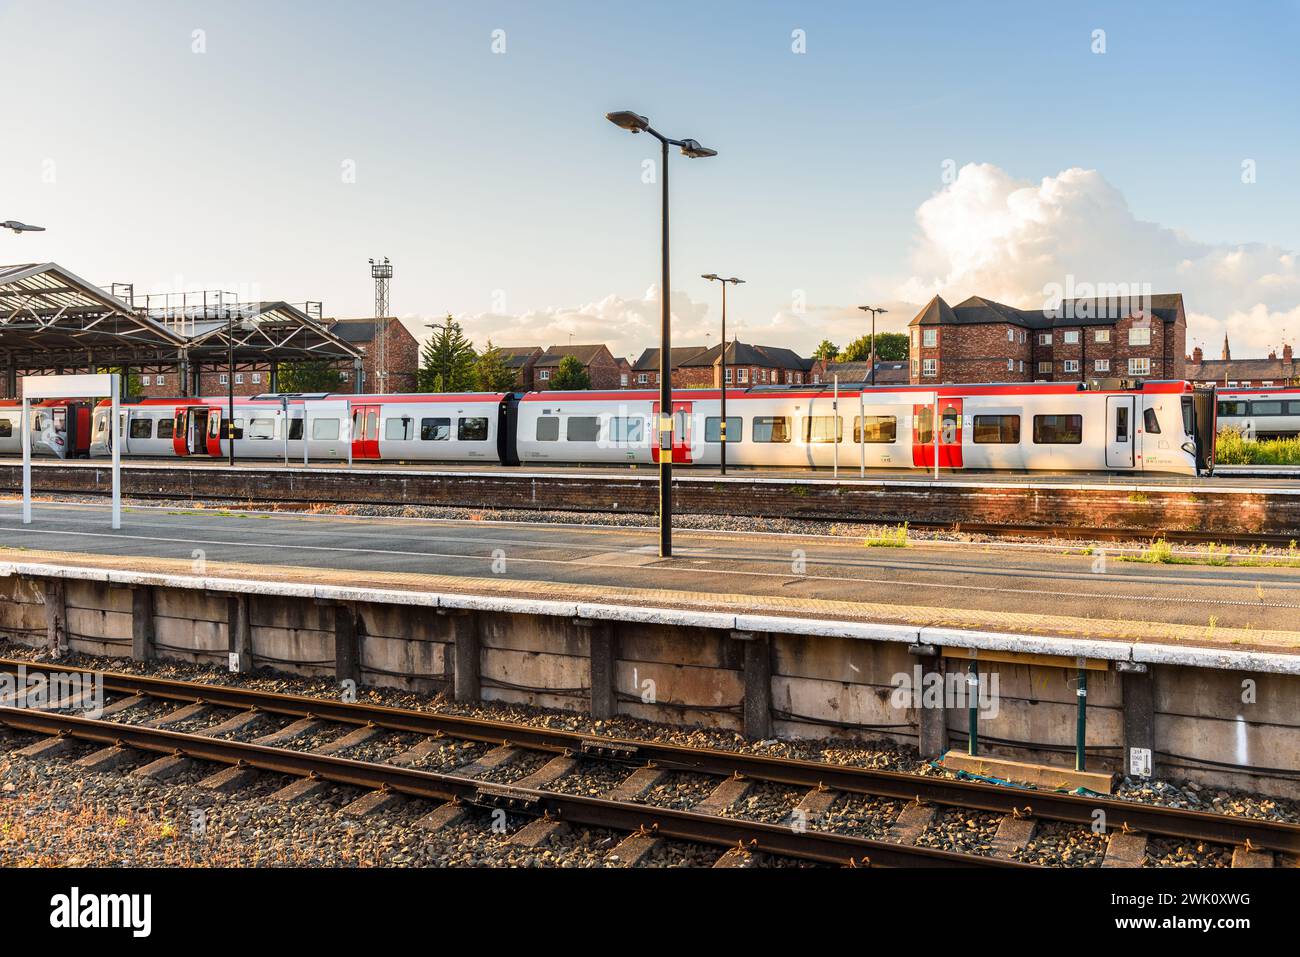 Diesel commuter train in station at sunset Stock Photo